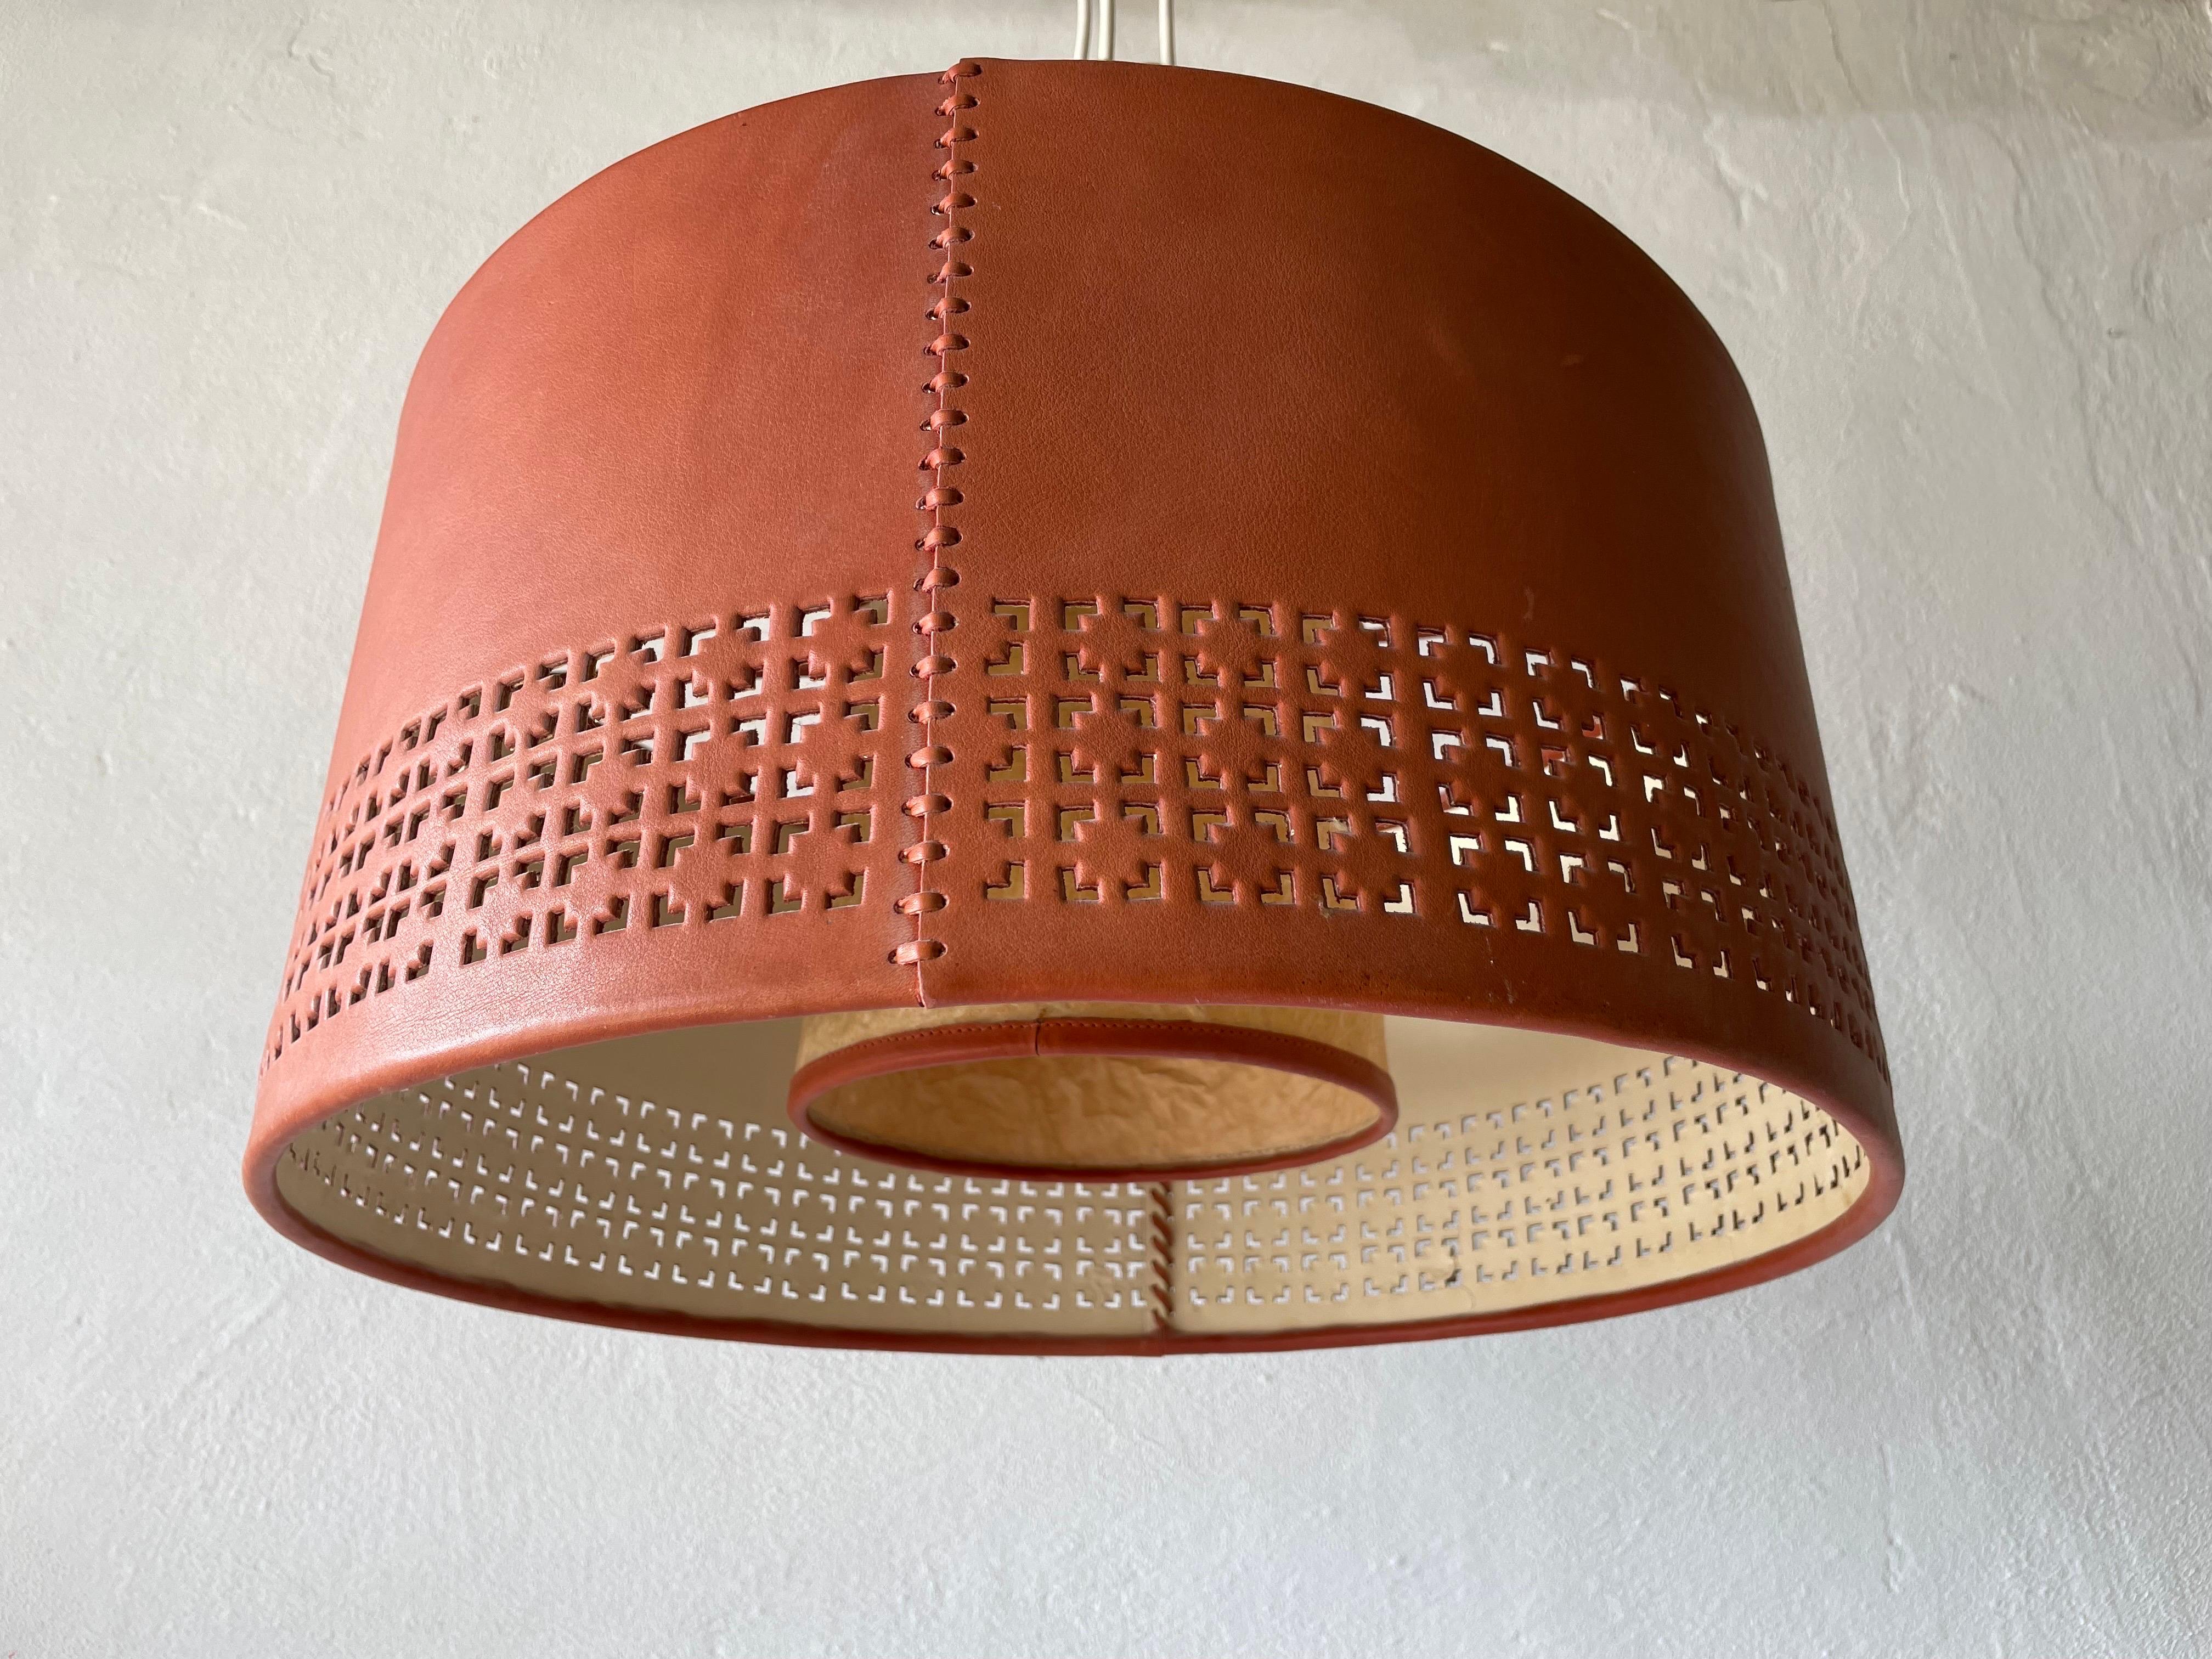 Cylindrical Leather Shade with Motifs Counterweight Pendant Lamp, 1960s, Germany For Sale 1